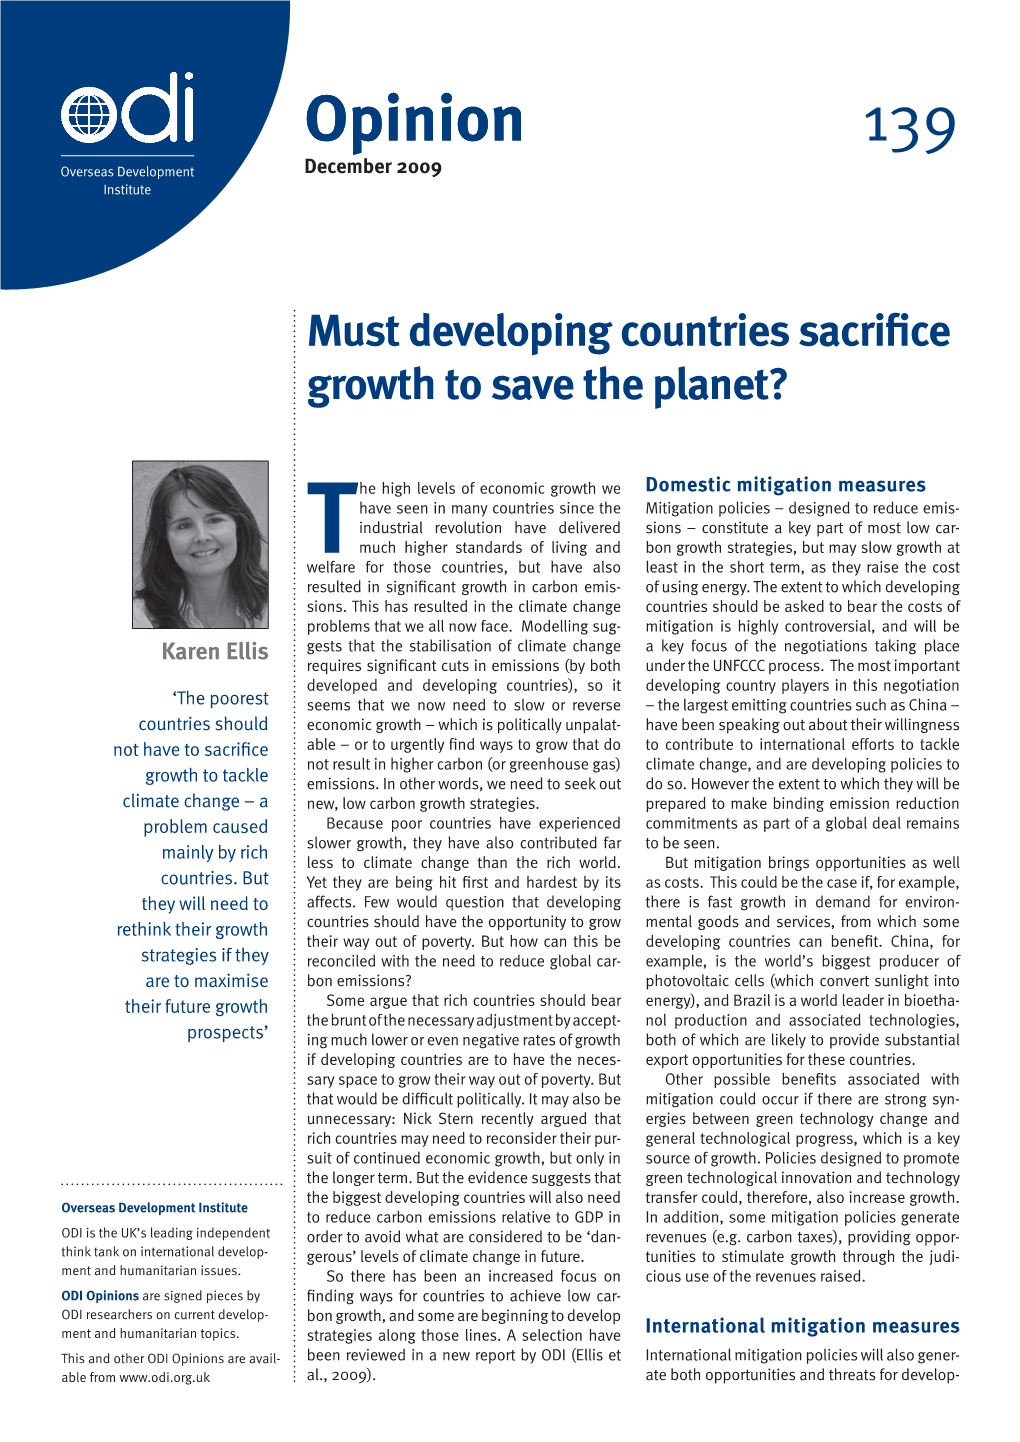 Must Developing Countries Sacrifice Growth to Save the Planet?